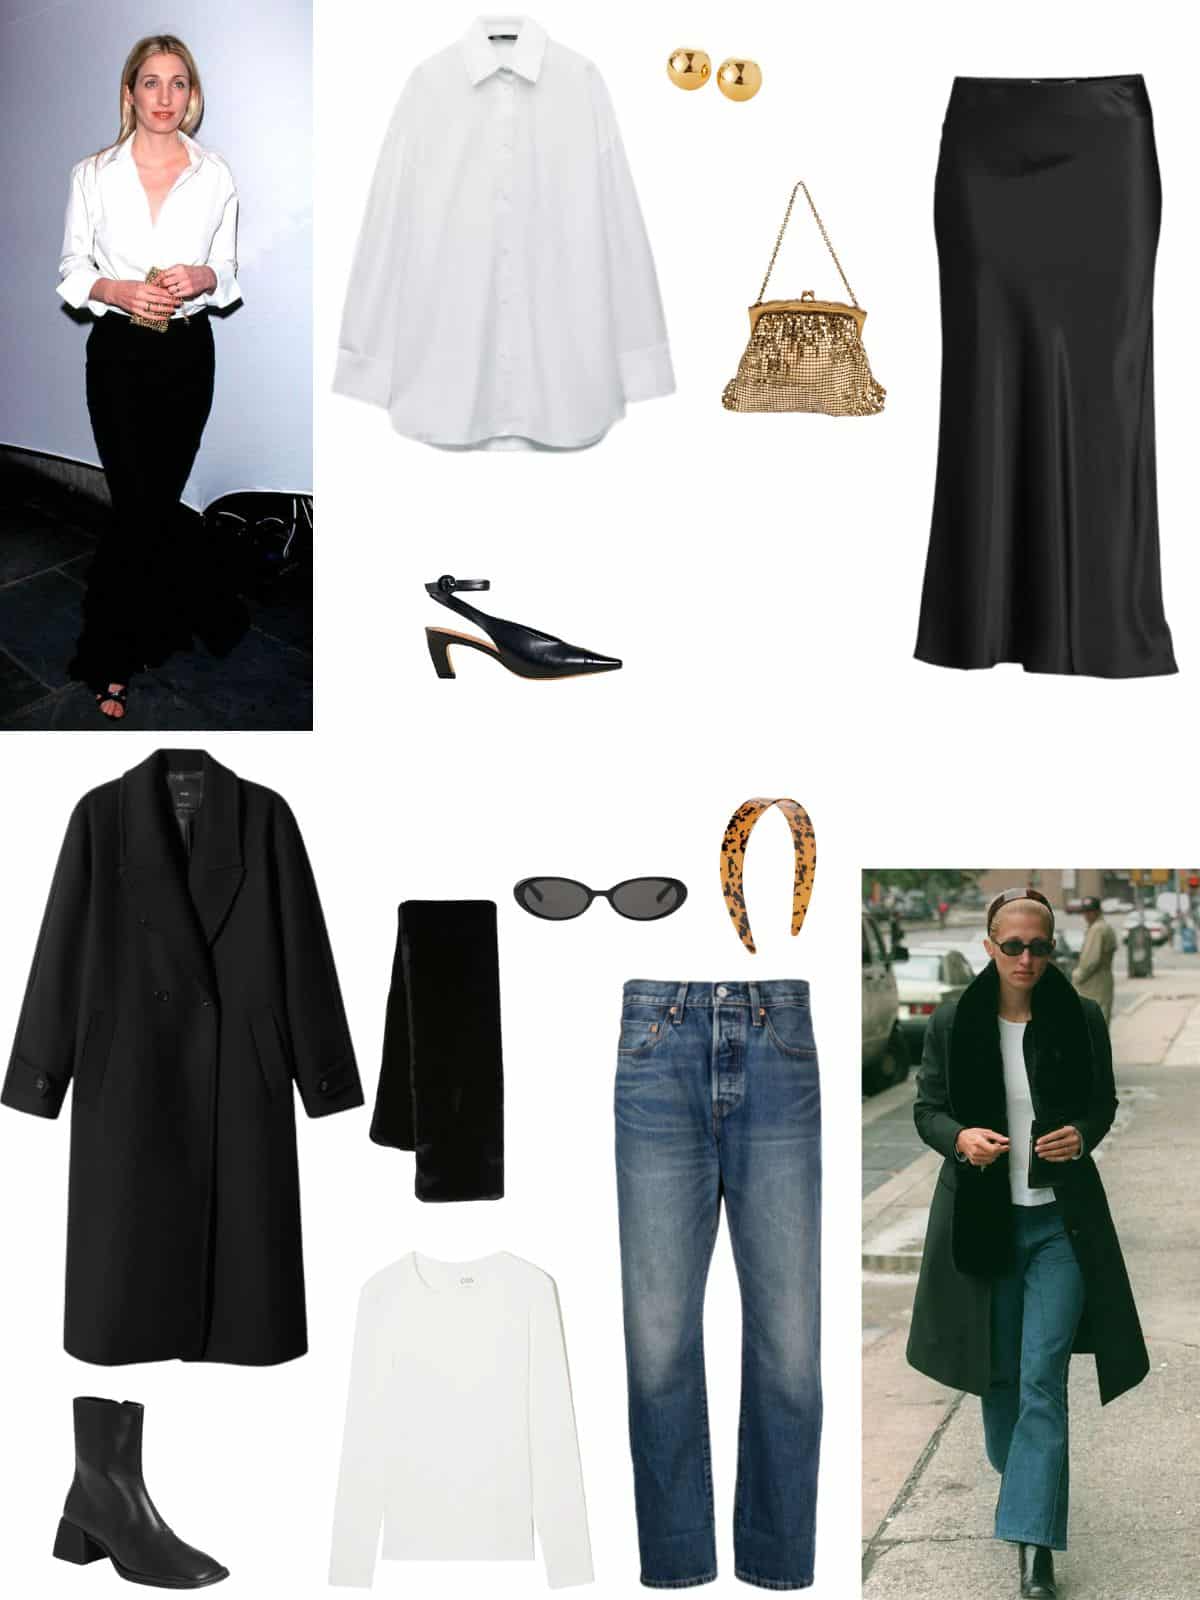 A white background with two photos of Carolyn Bessette-Kennedy. Beside each photo is an outfit inspired by what she is wearing. Outfit one is a button up, satin maxi skirt, black heels, and a gold mesh bag. Outfit two is blue jeans, a white long sleeve, black coat, and black boots.